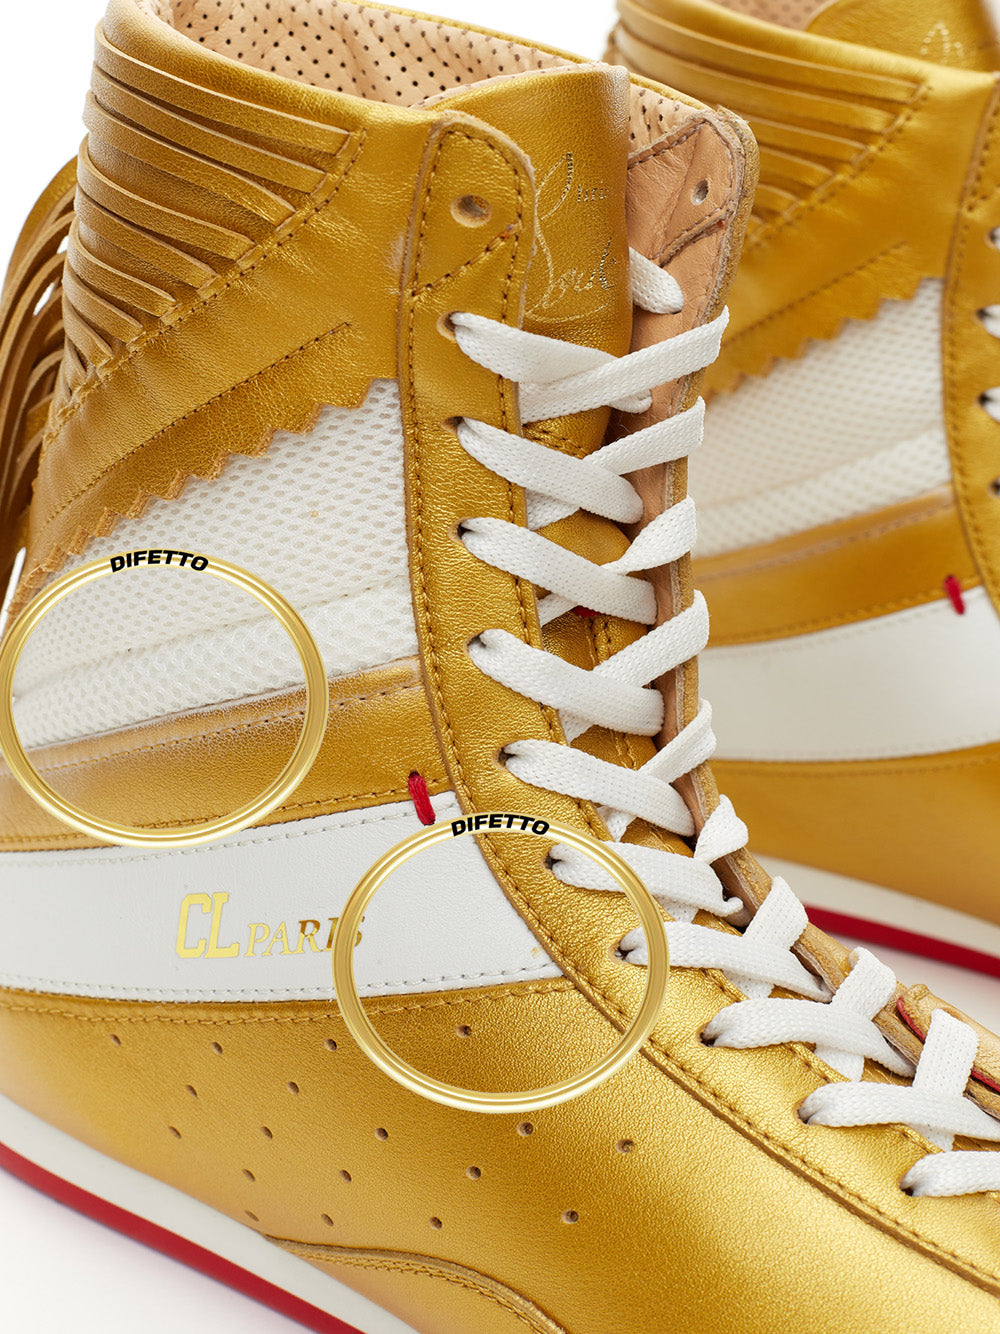 Gold Boxeur Sneakers with Fringes Christian Louboutin